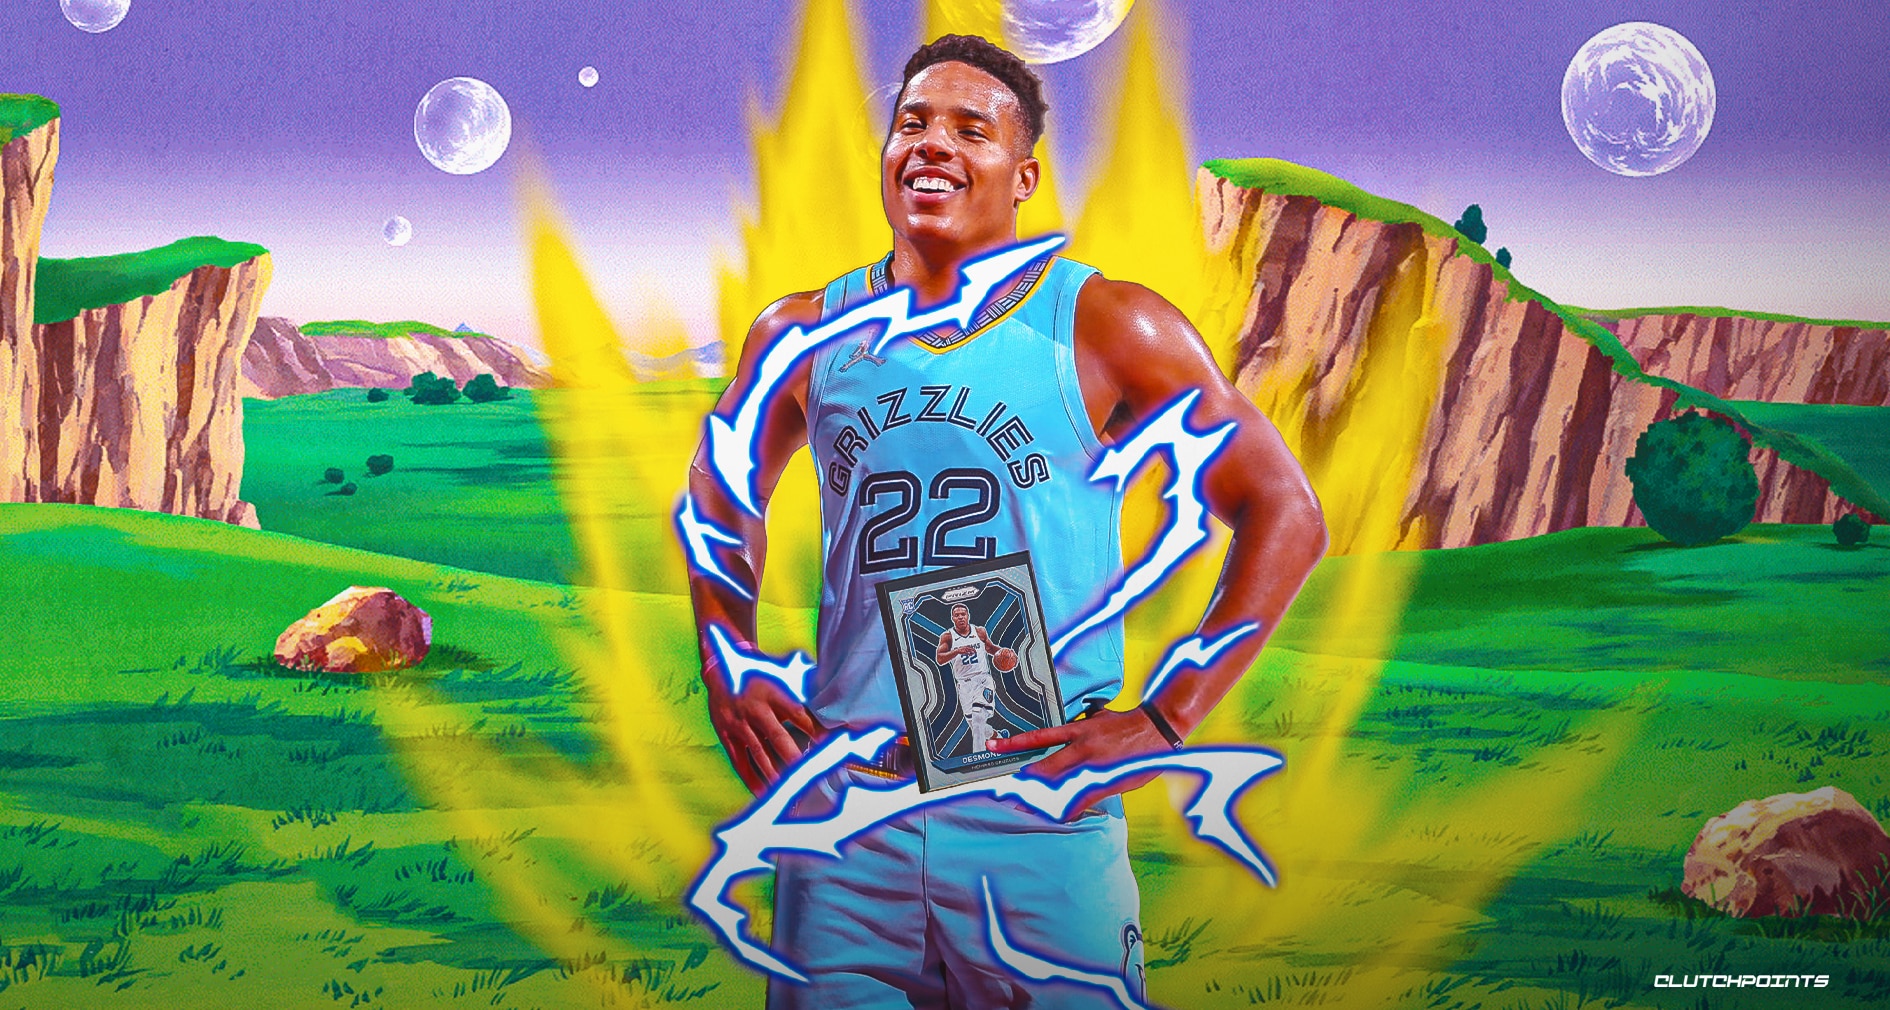 Desmond Bane cards are goingf amid epic sophomore